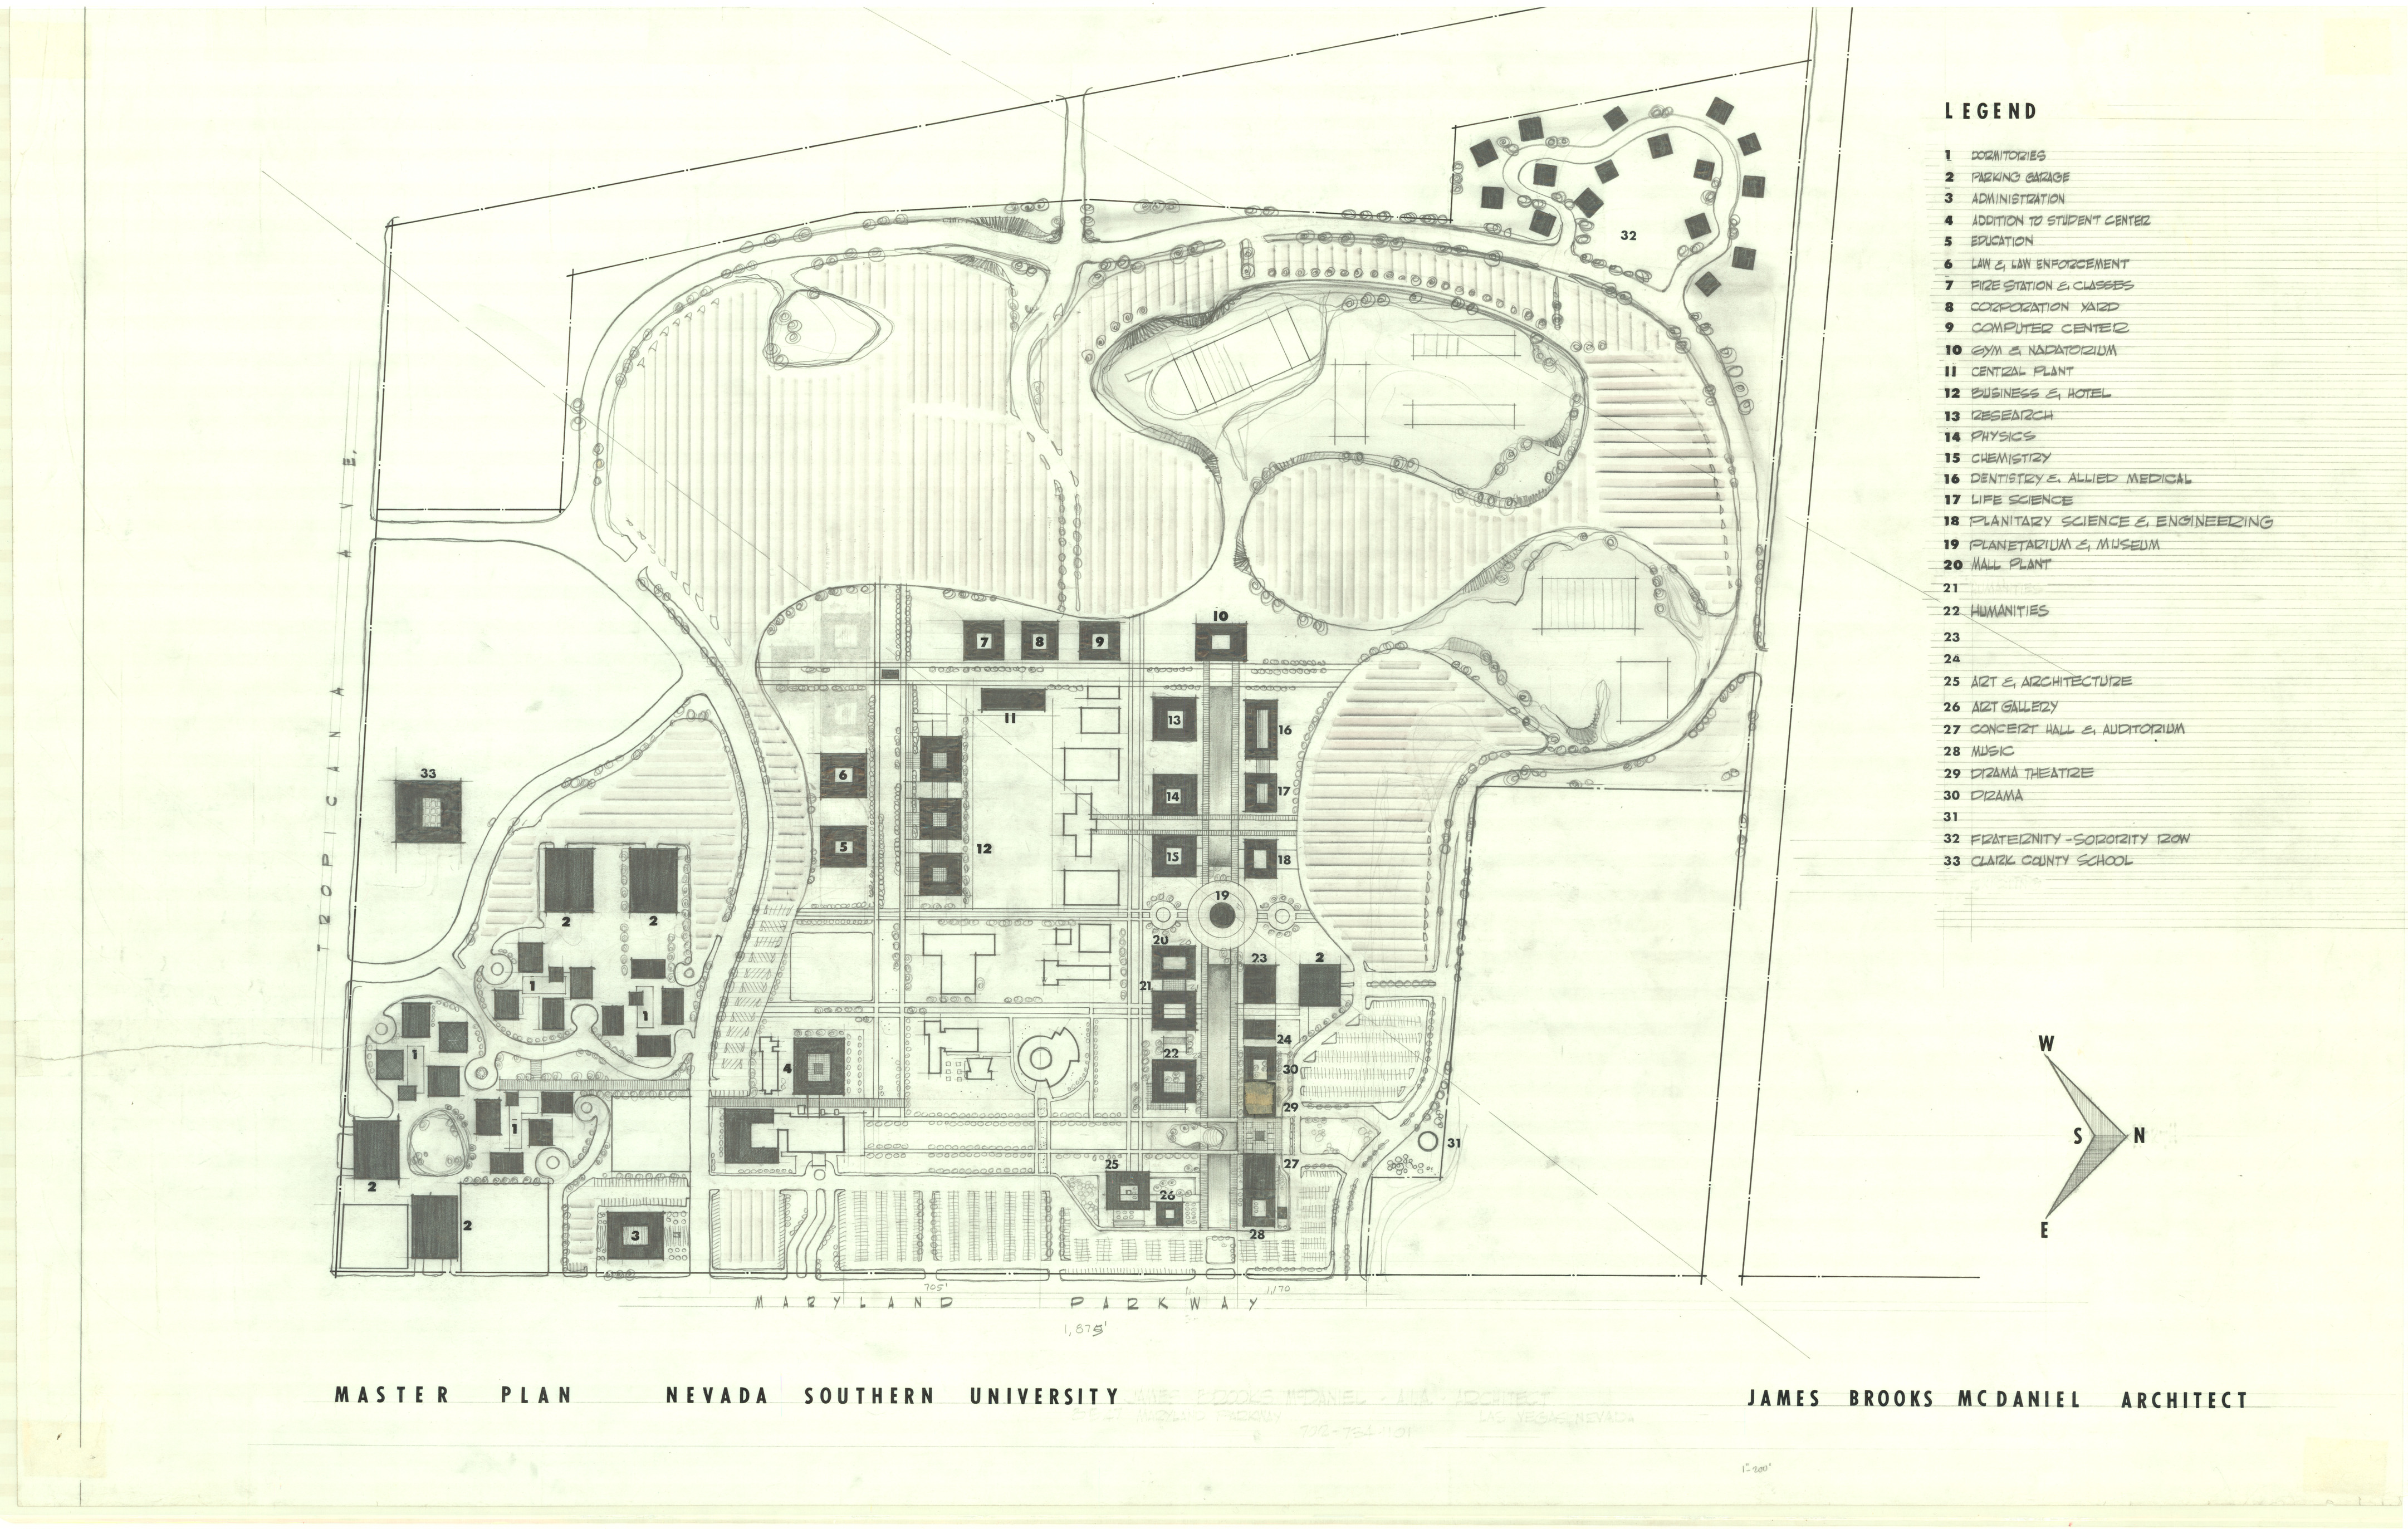 Nevada Southern University master plan: architectural drawings, image 003